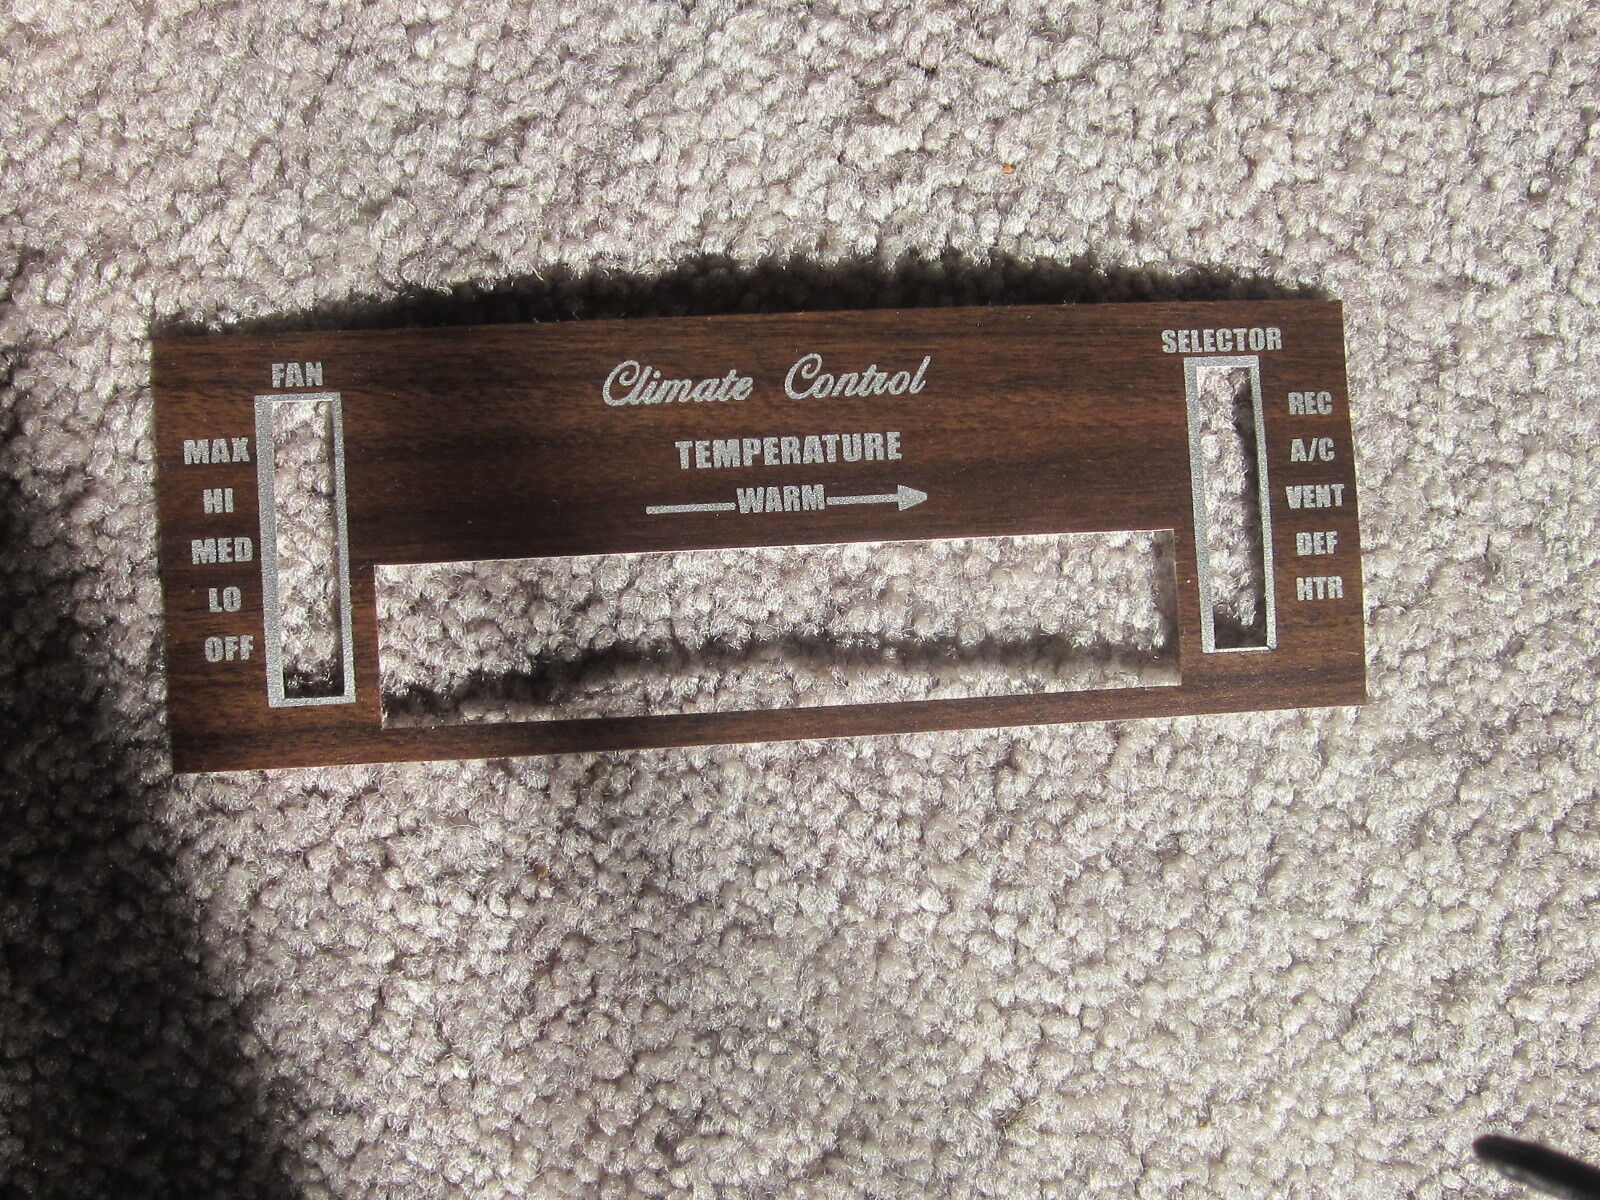 1970-72 skylark and gs temperature control wood grain trim for models with air